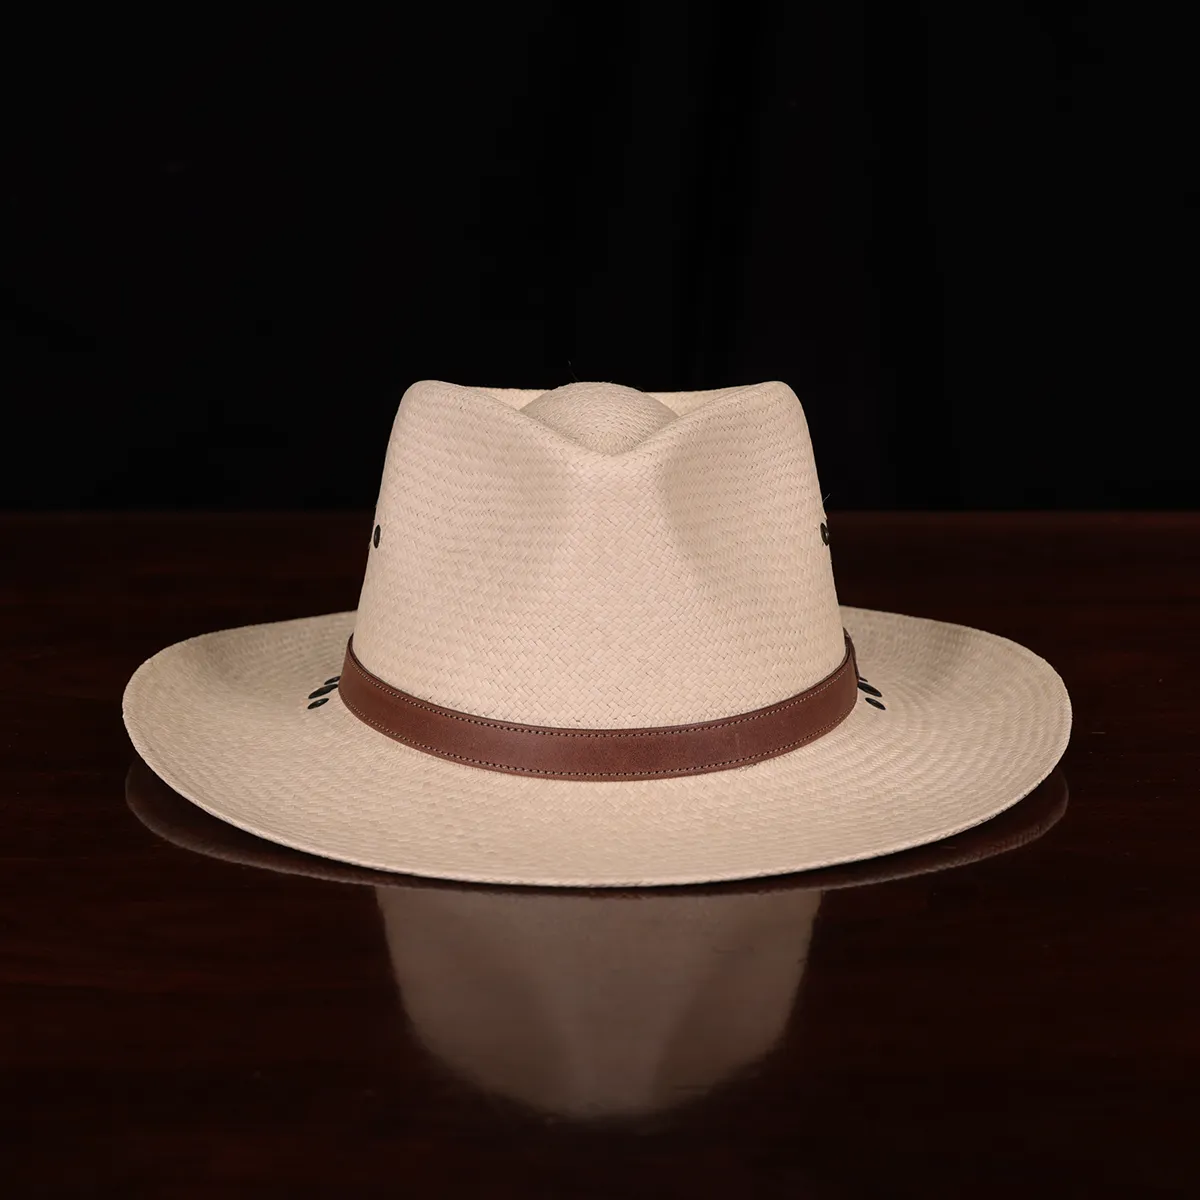 No. 2 Lynnville Panama Hat in the color natural showing the front